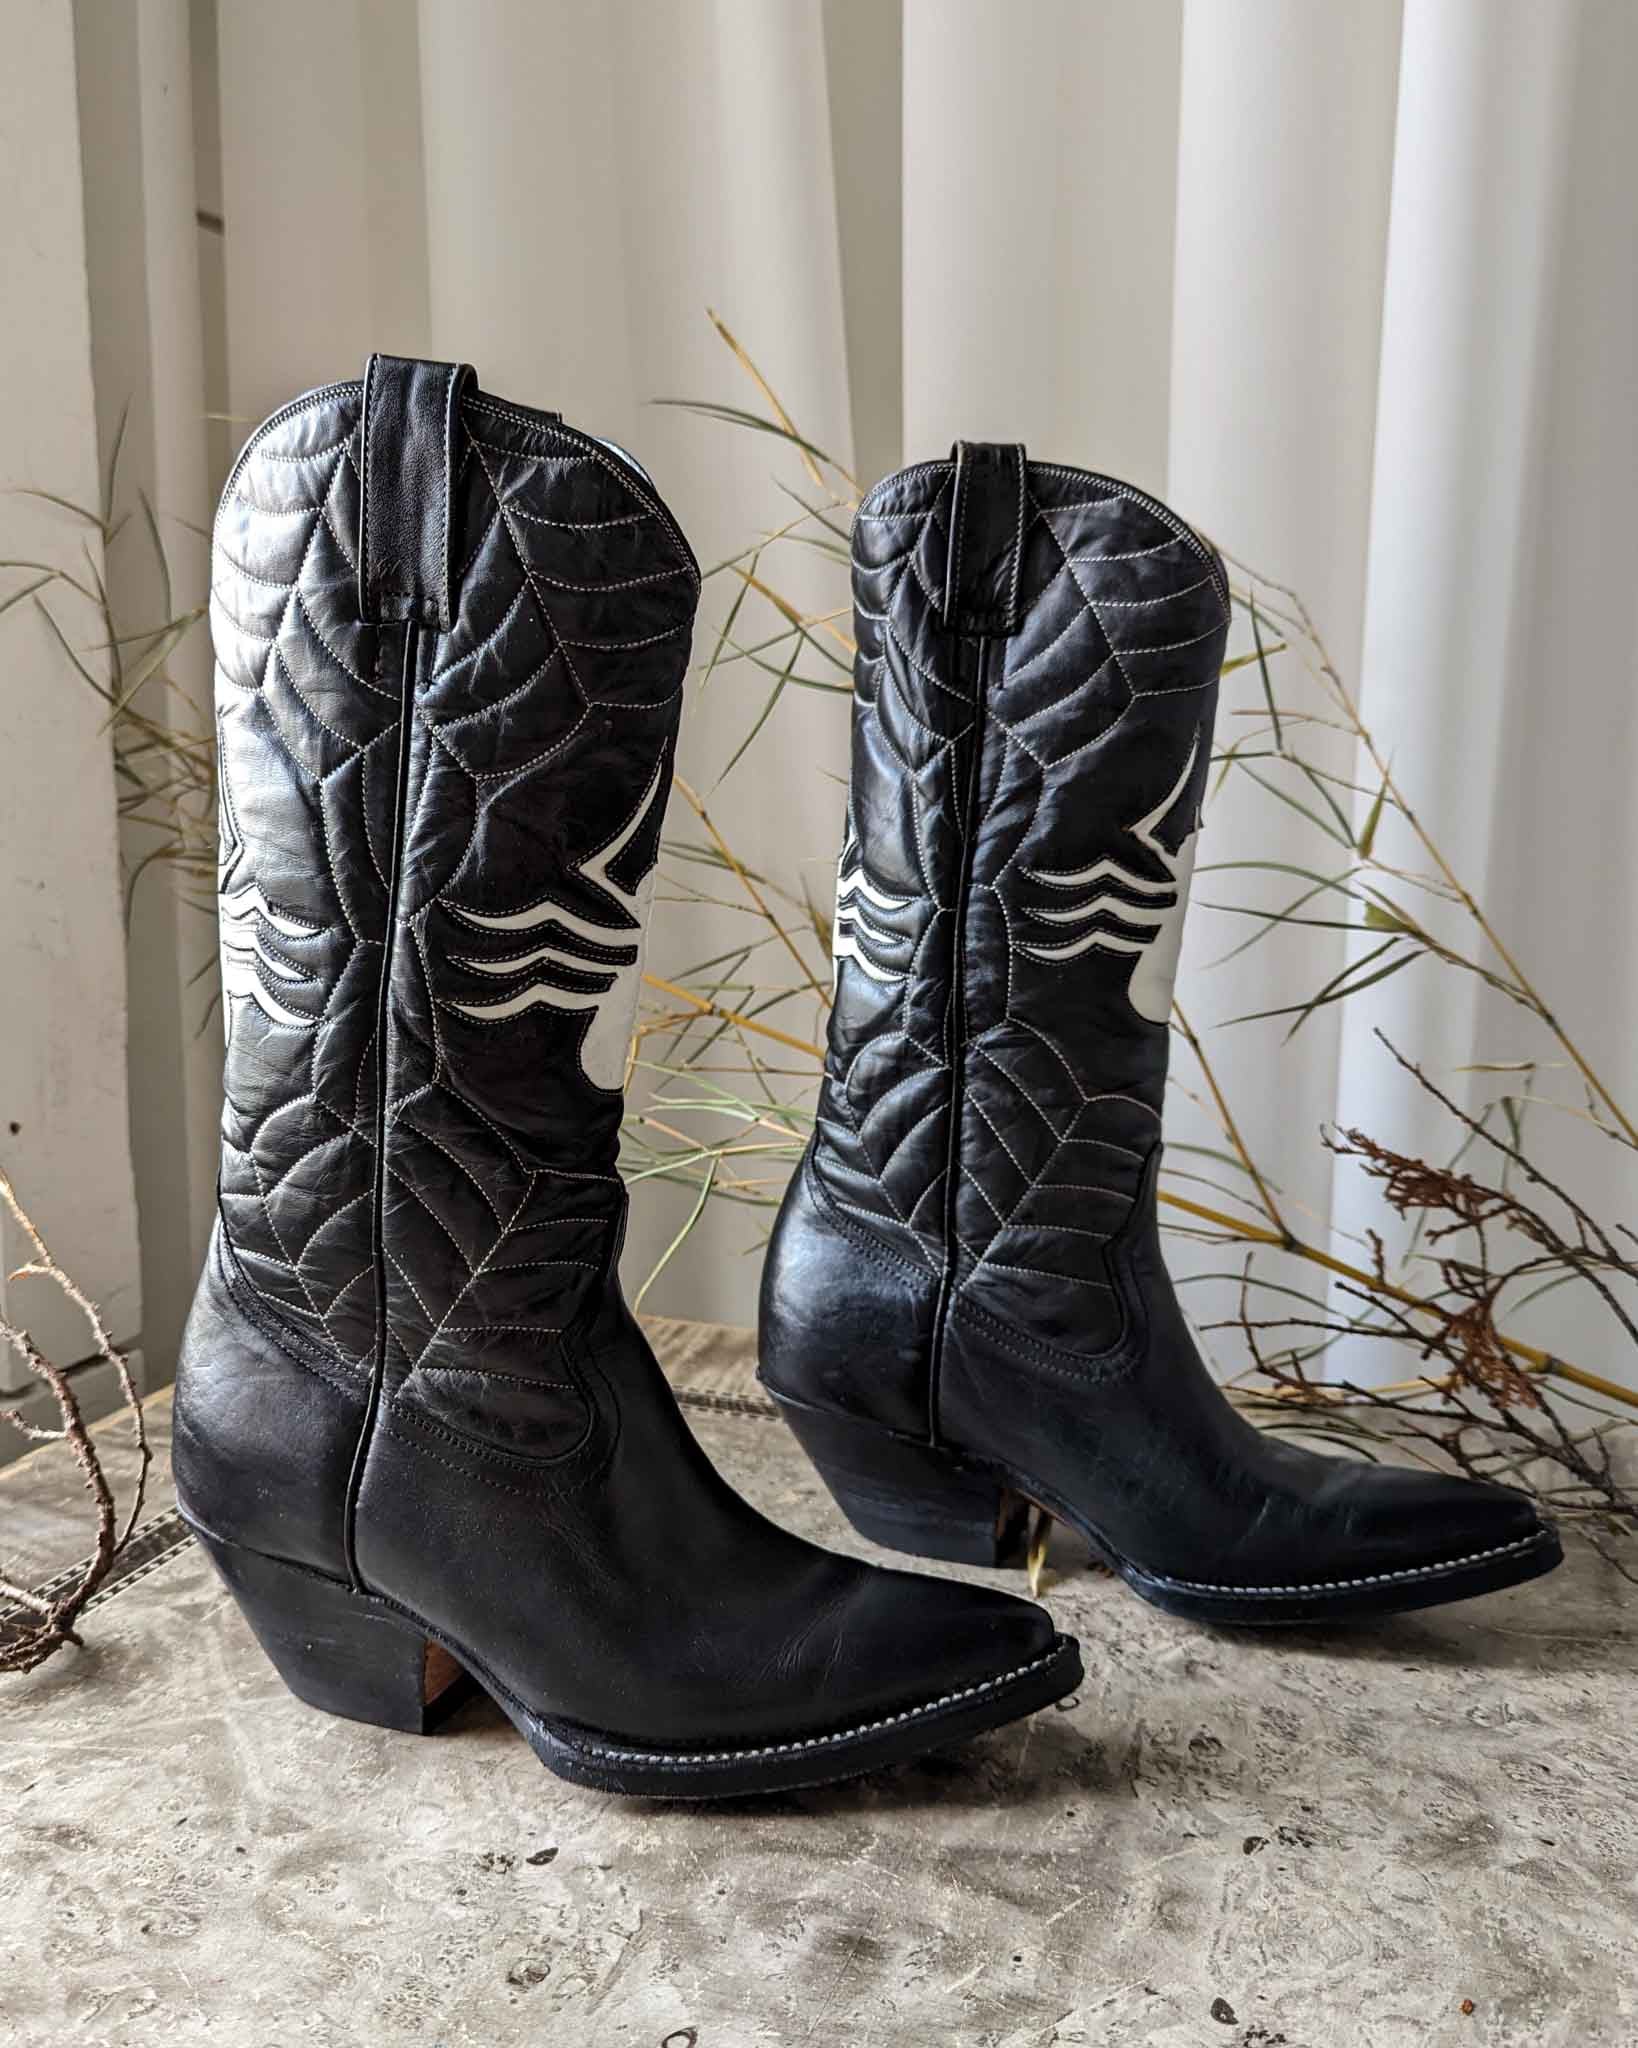 Vintage Leather Black Cowboy Boots Great Low Shaft / Ranch 